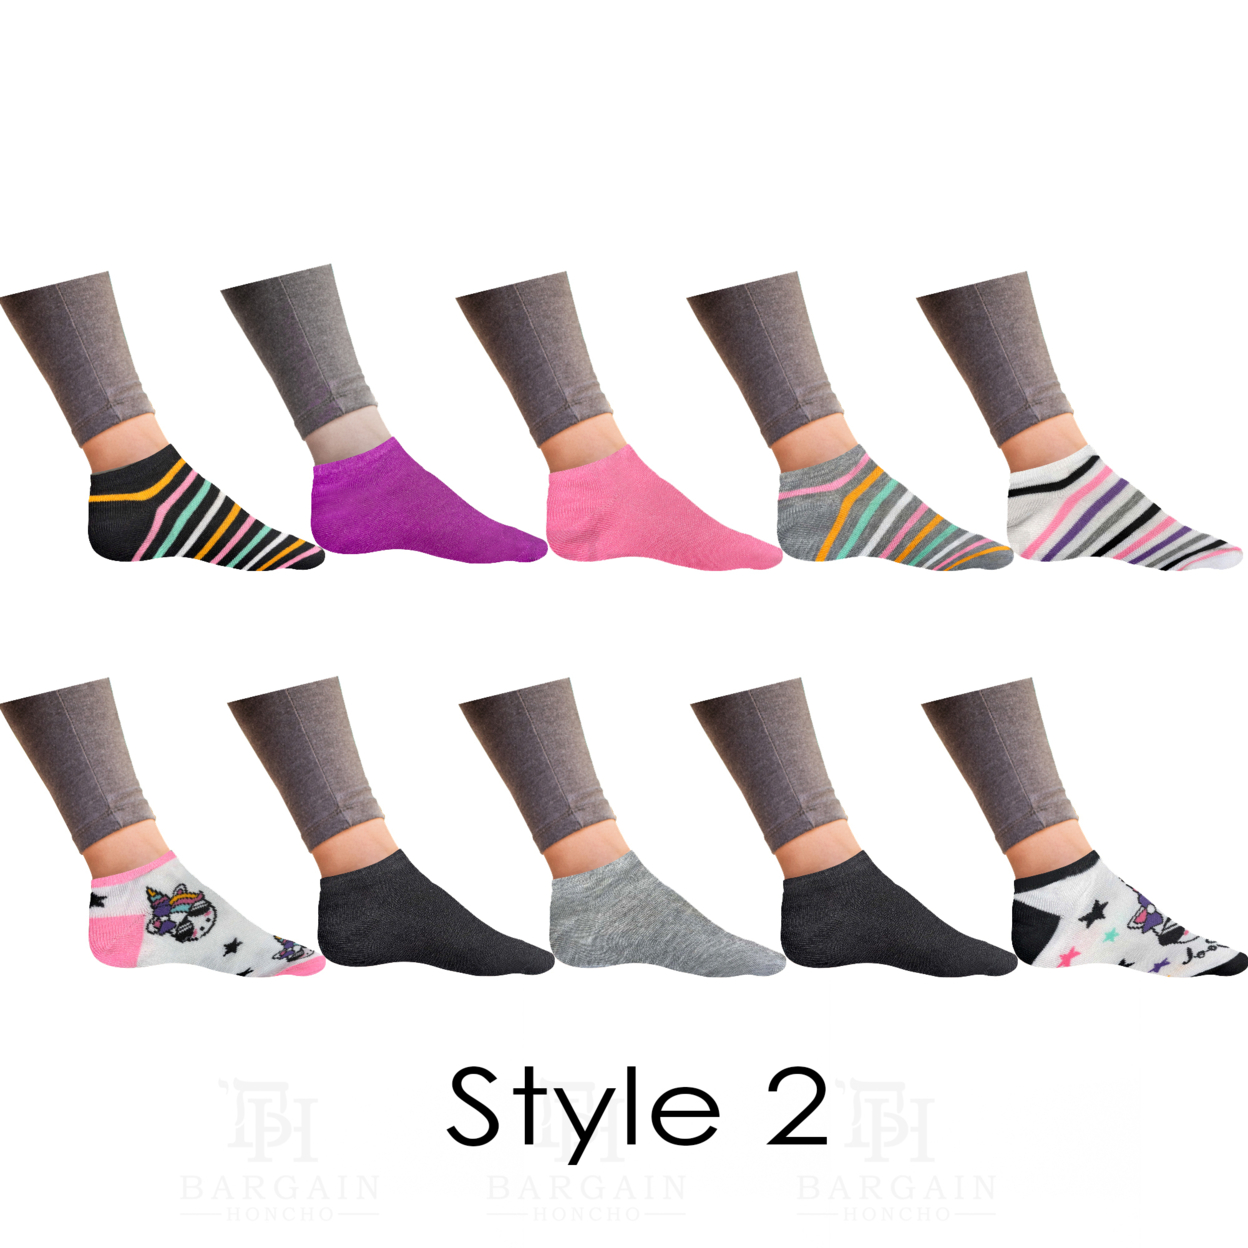 20-Pairs: Women’s Breathable Colorful Fun No Show Low Cut Ankle Socks - 1 & 4